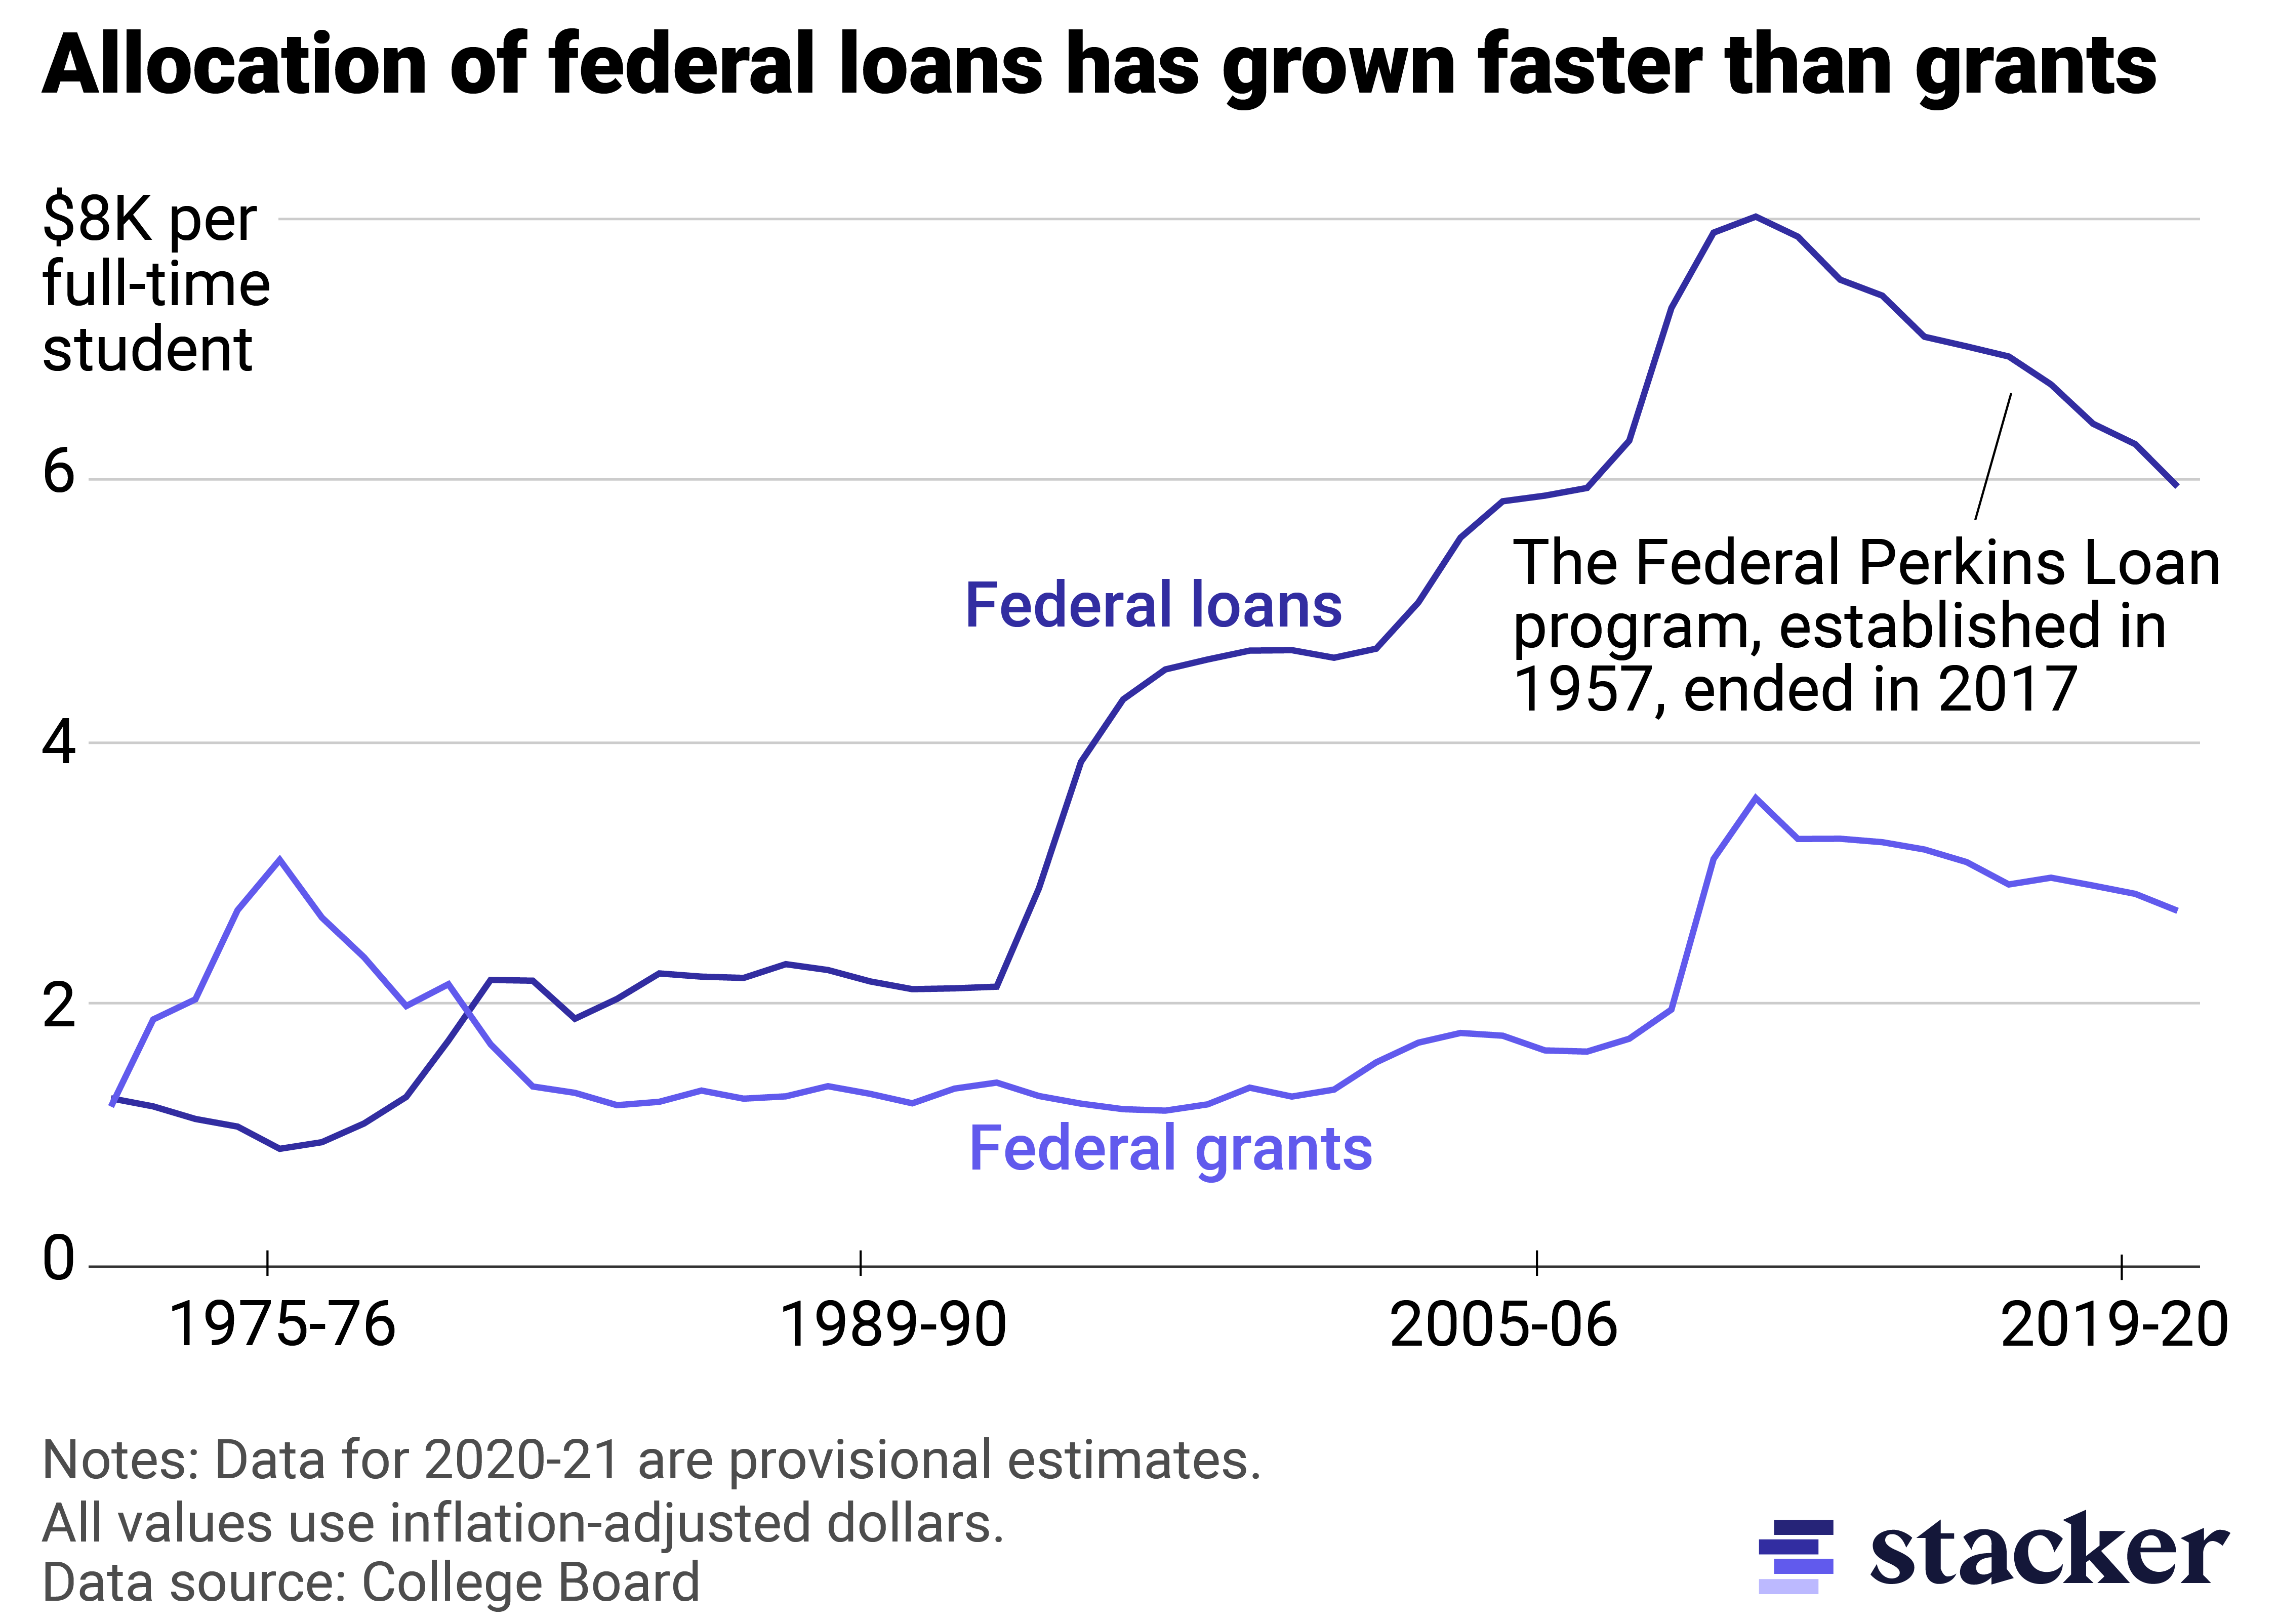 Line chart showing the allocation of federal loans has grown more than federal grants since the 1970s. 